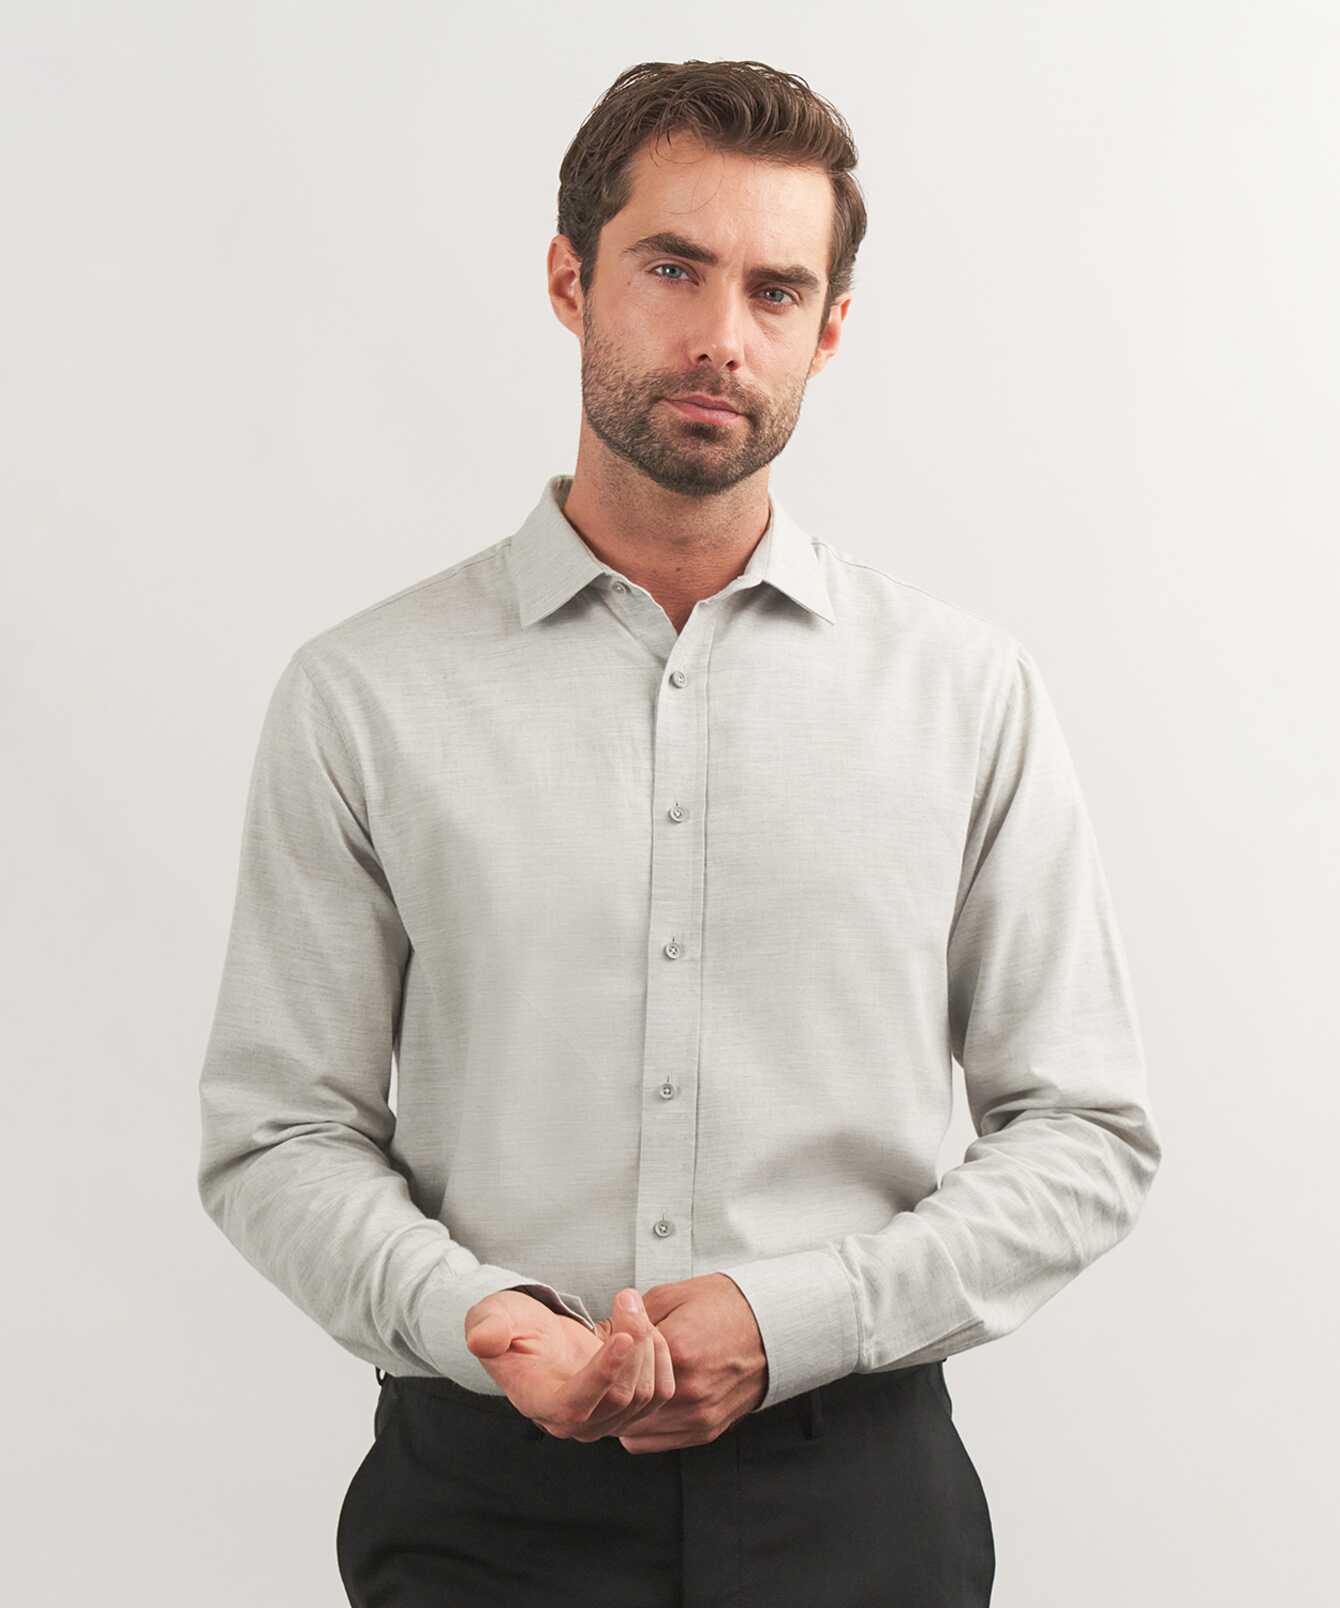 Shirt Costello Light Grey Twill Shirt in Brushed Cotton The Shirt Factory